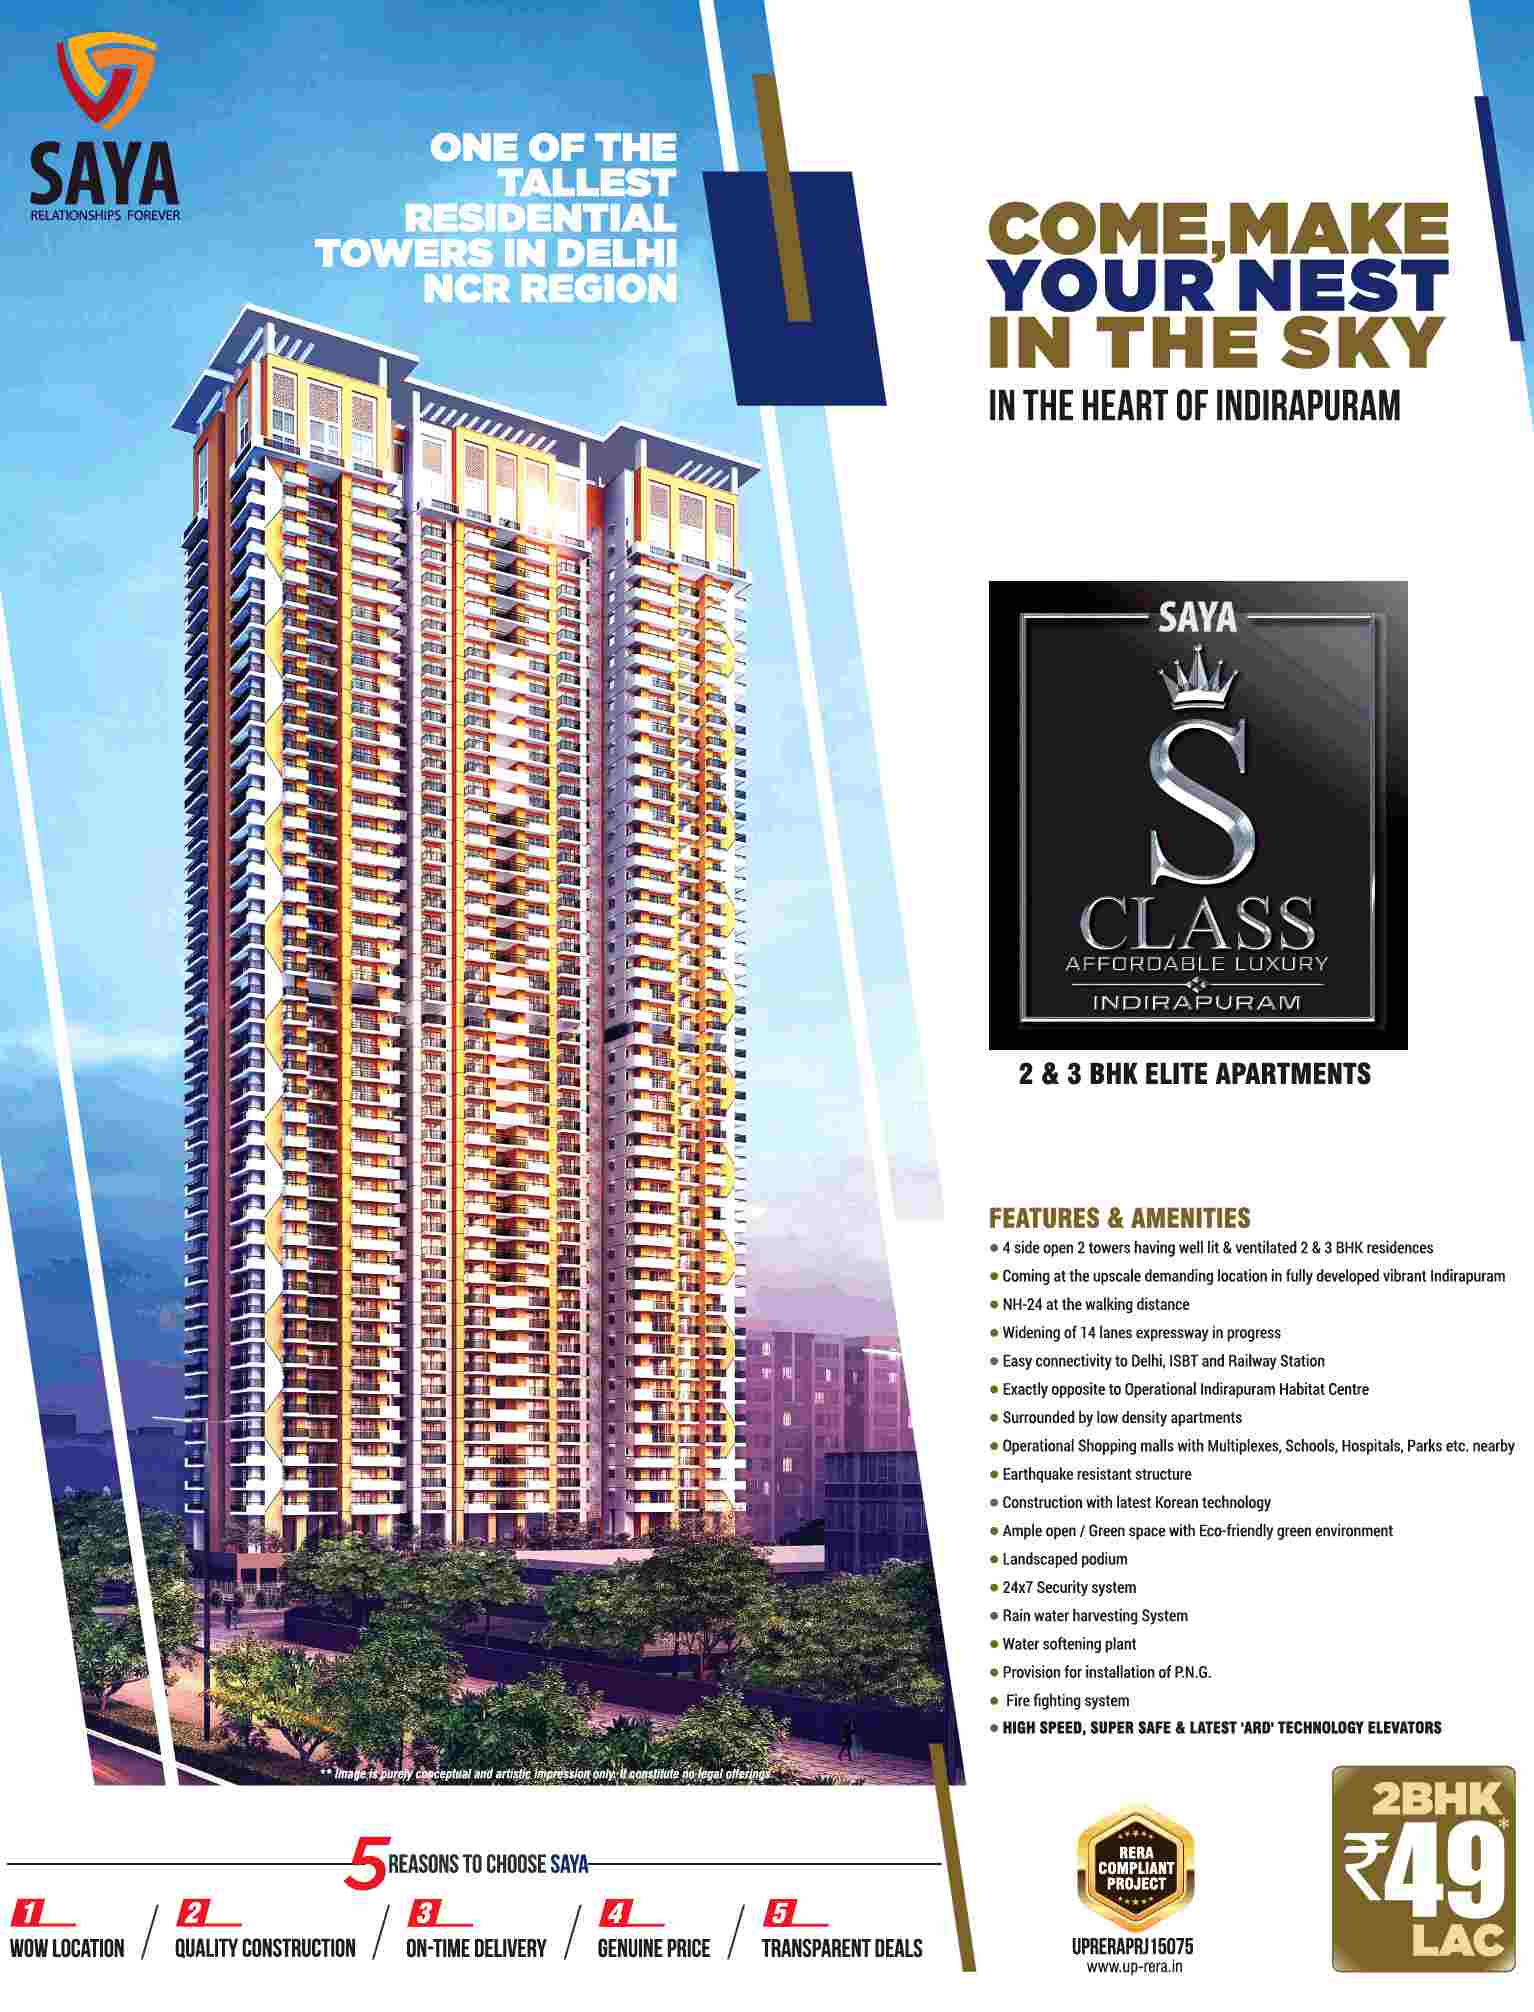 Come make your nest in the sky by residing at Saya S Class in Ghaziabad Update